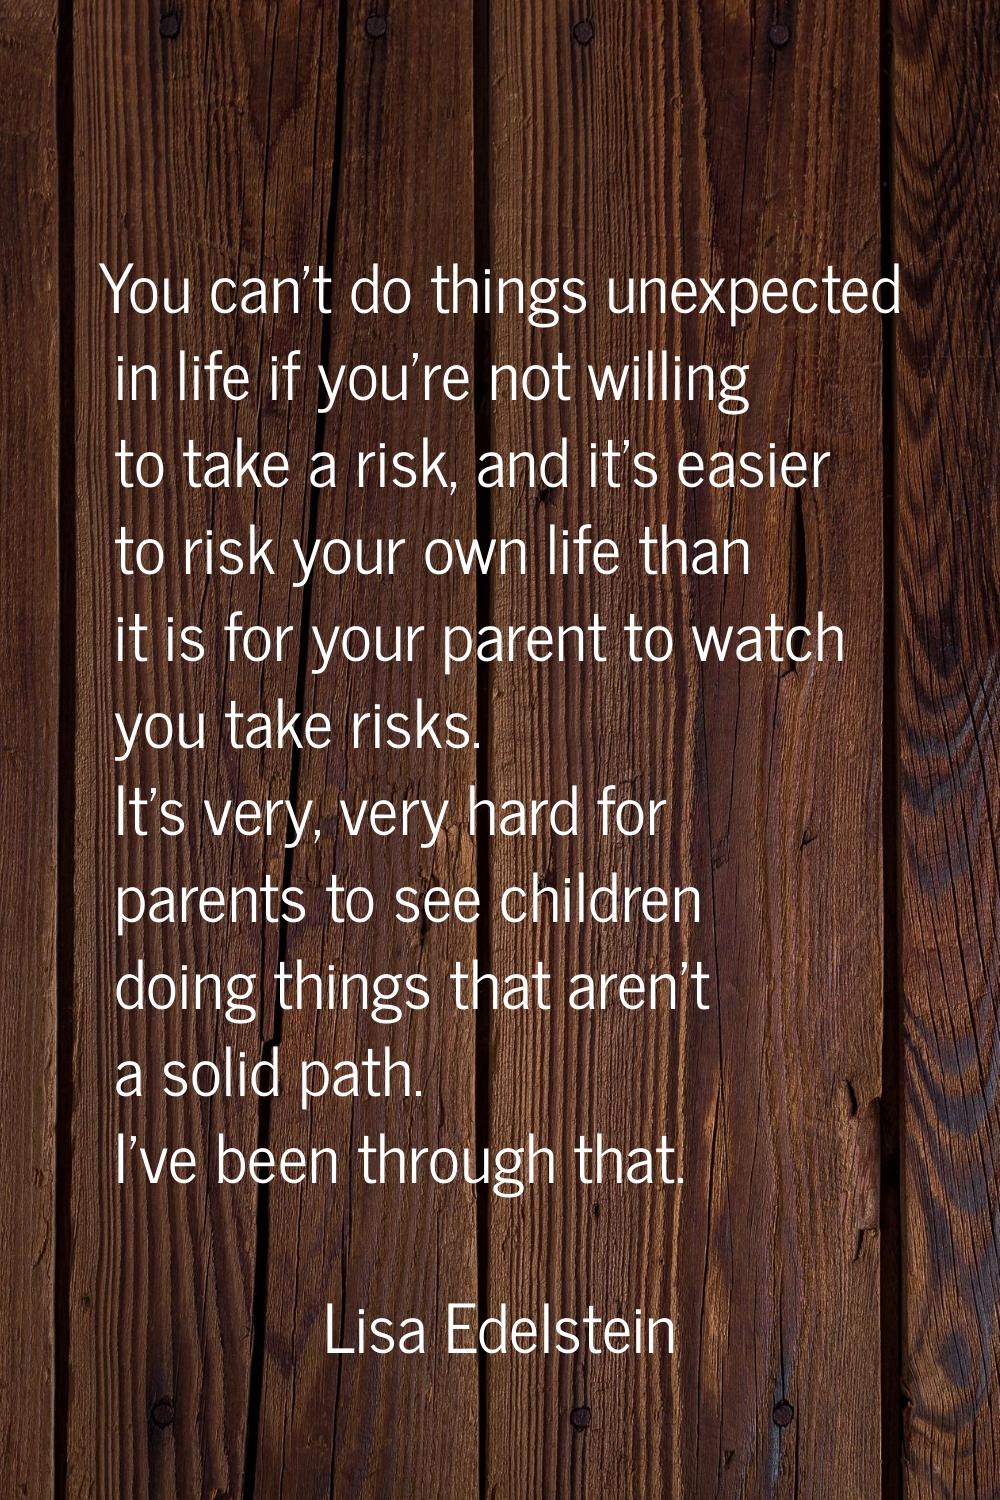 You can't do things unexpected in life if you're not willing to take a risk, and it's easier to ris